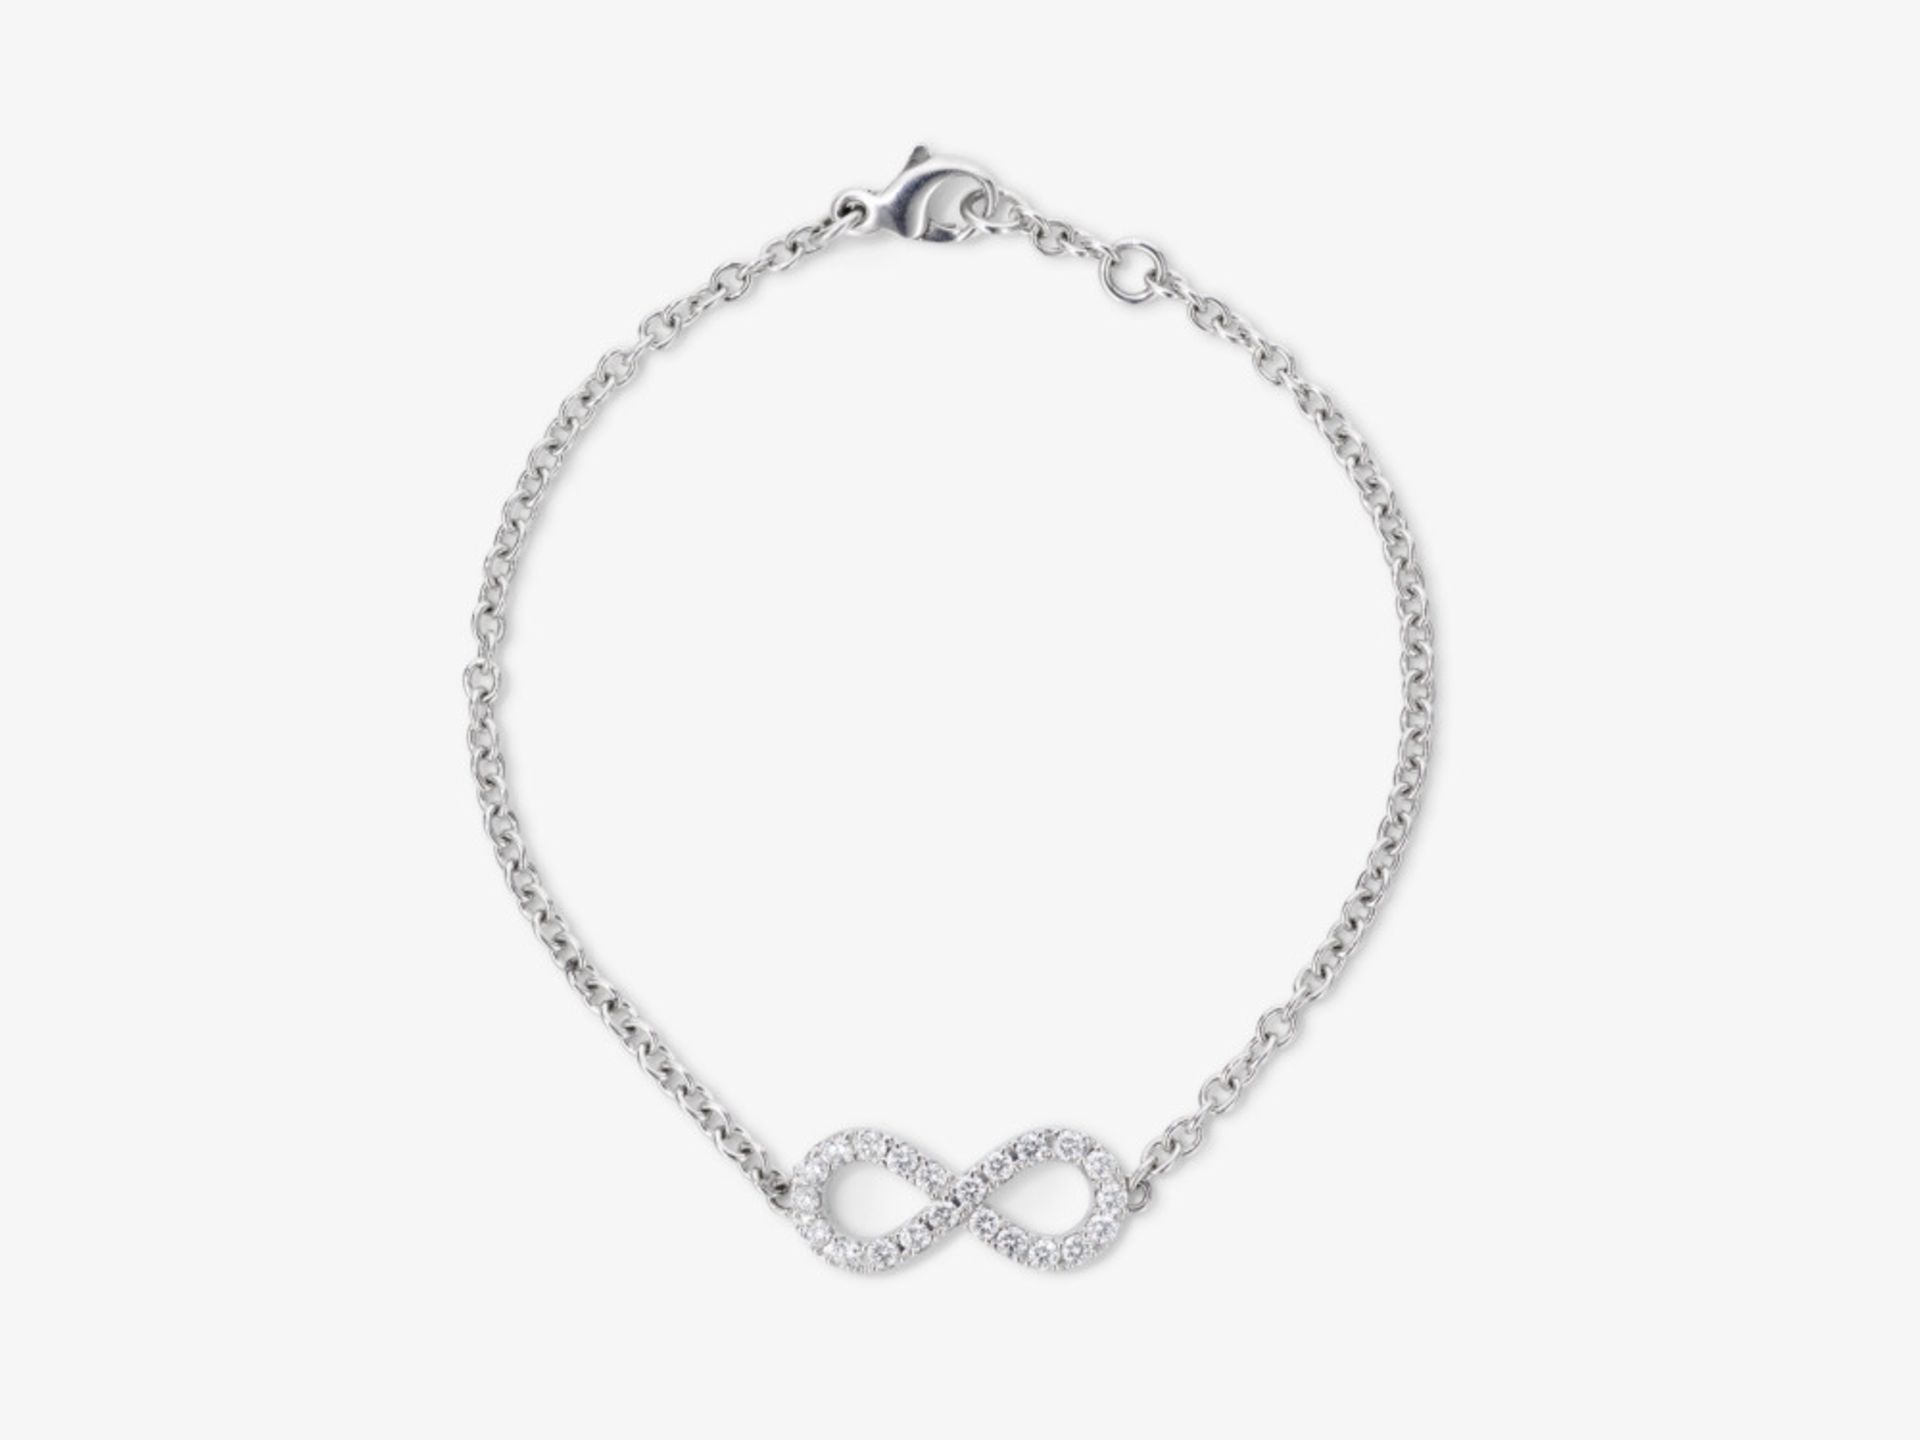 A bracelet with an infinity symbol decorated with brilliant-cut diamonds - Germany